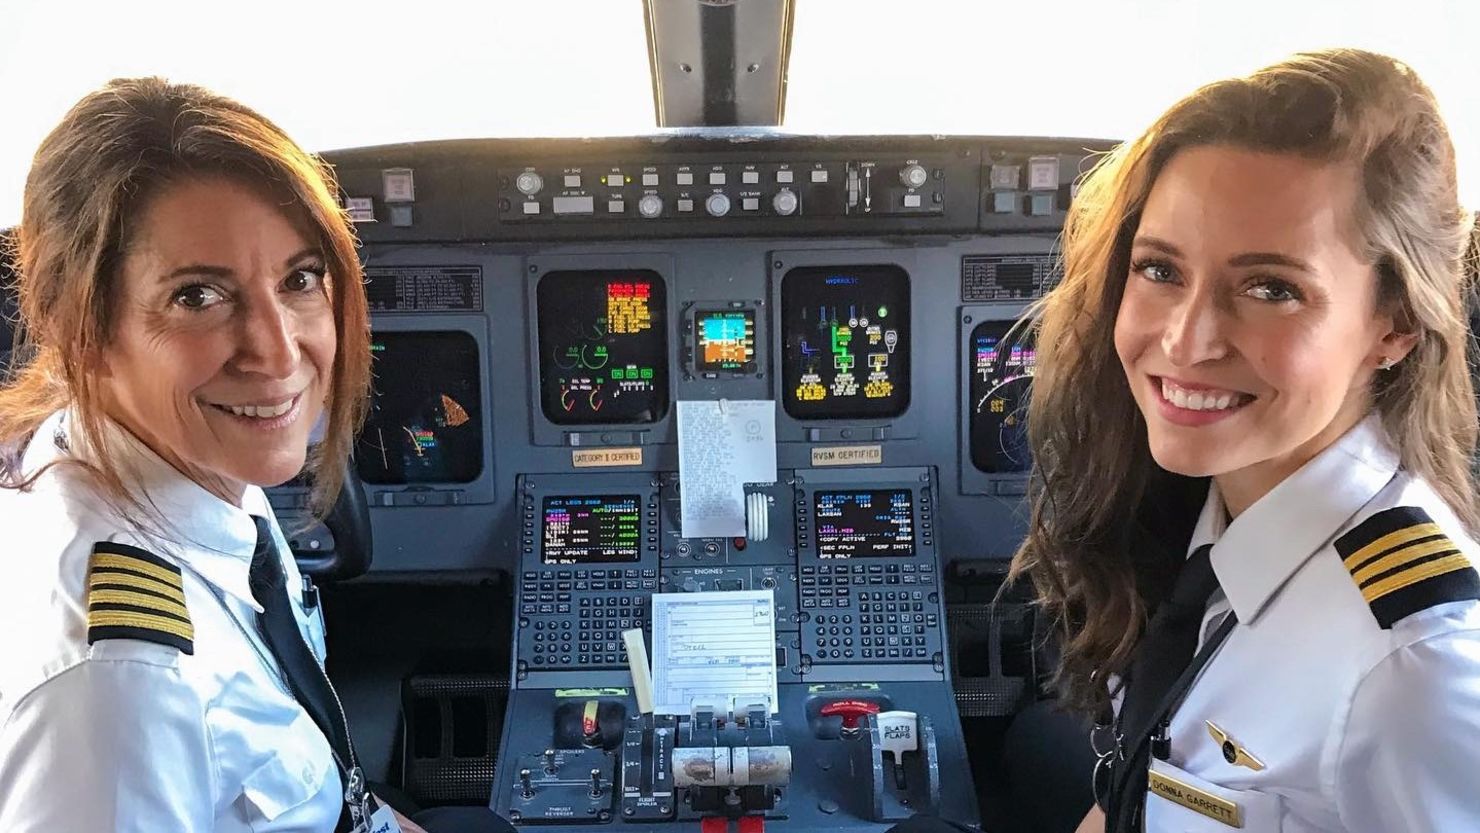 Suzy Garrett and her daughter Donna flew as co-pilots for SkyWest airlines.